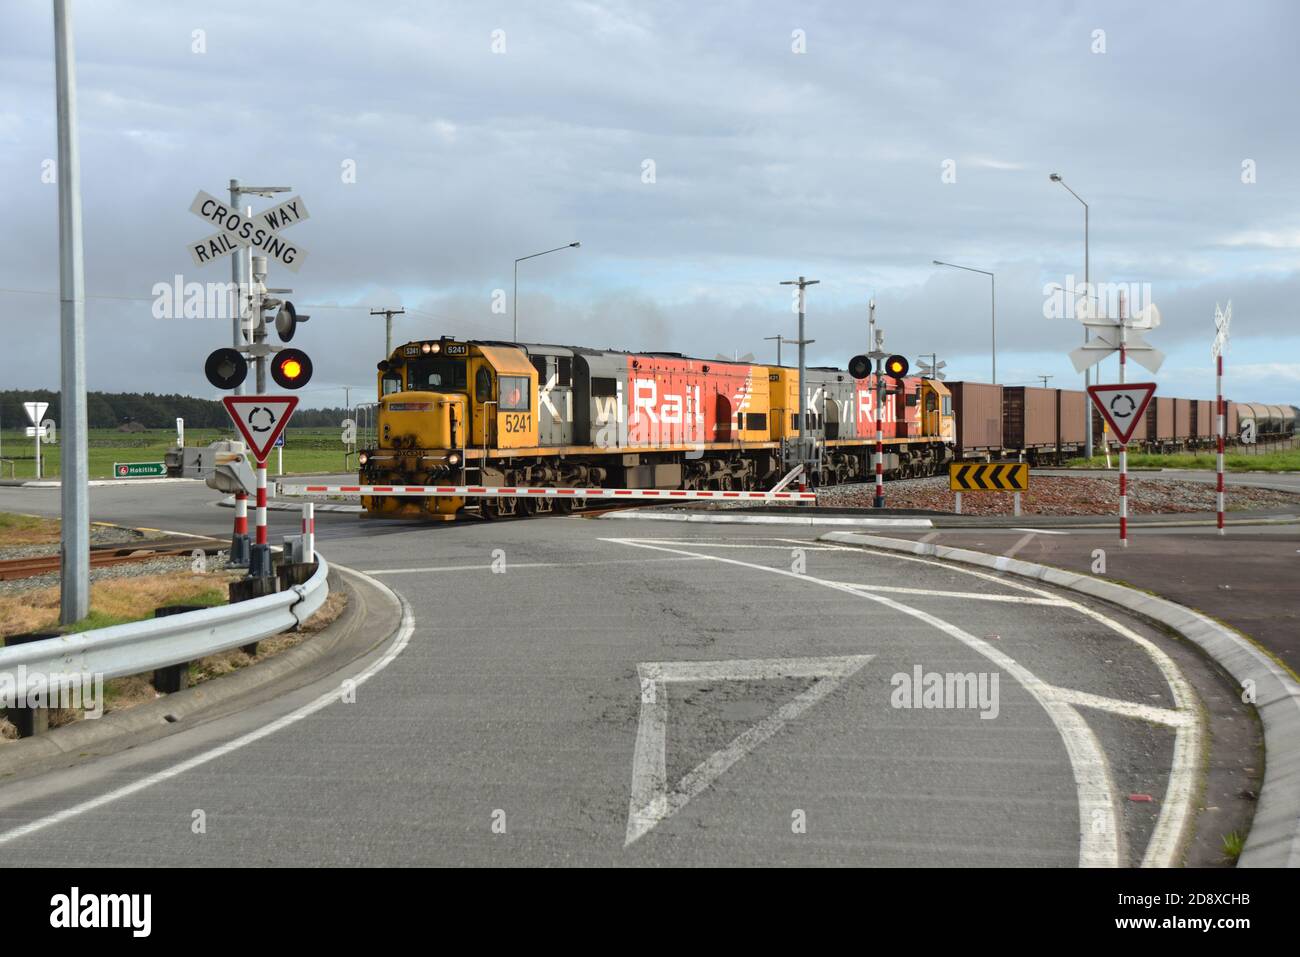 ARAHURA, NEW ZEALAND, AUGUST 29, 2020: A freight train crosses the main road at Arahura on State Highway 6. Stock Photo